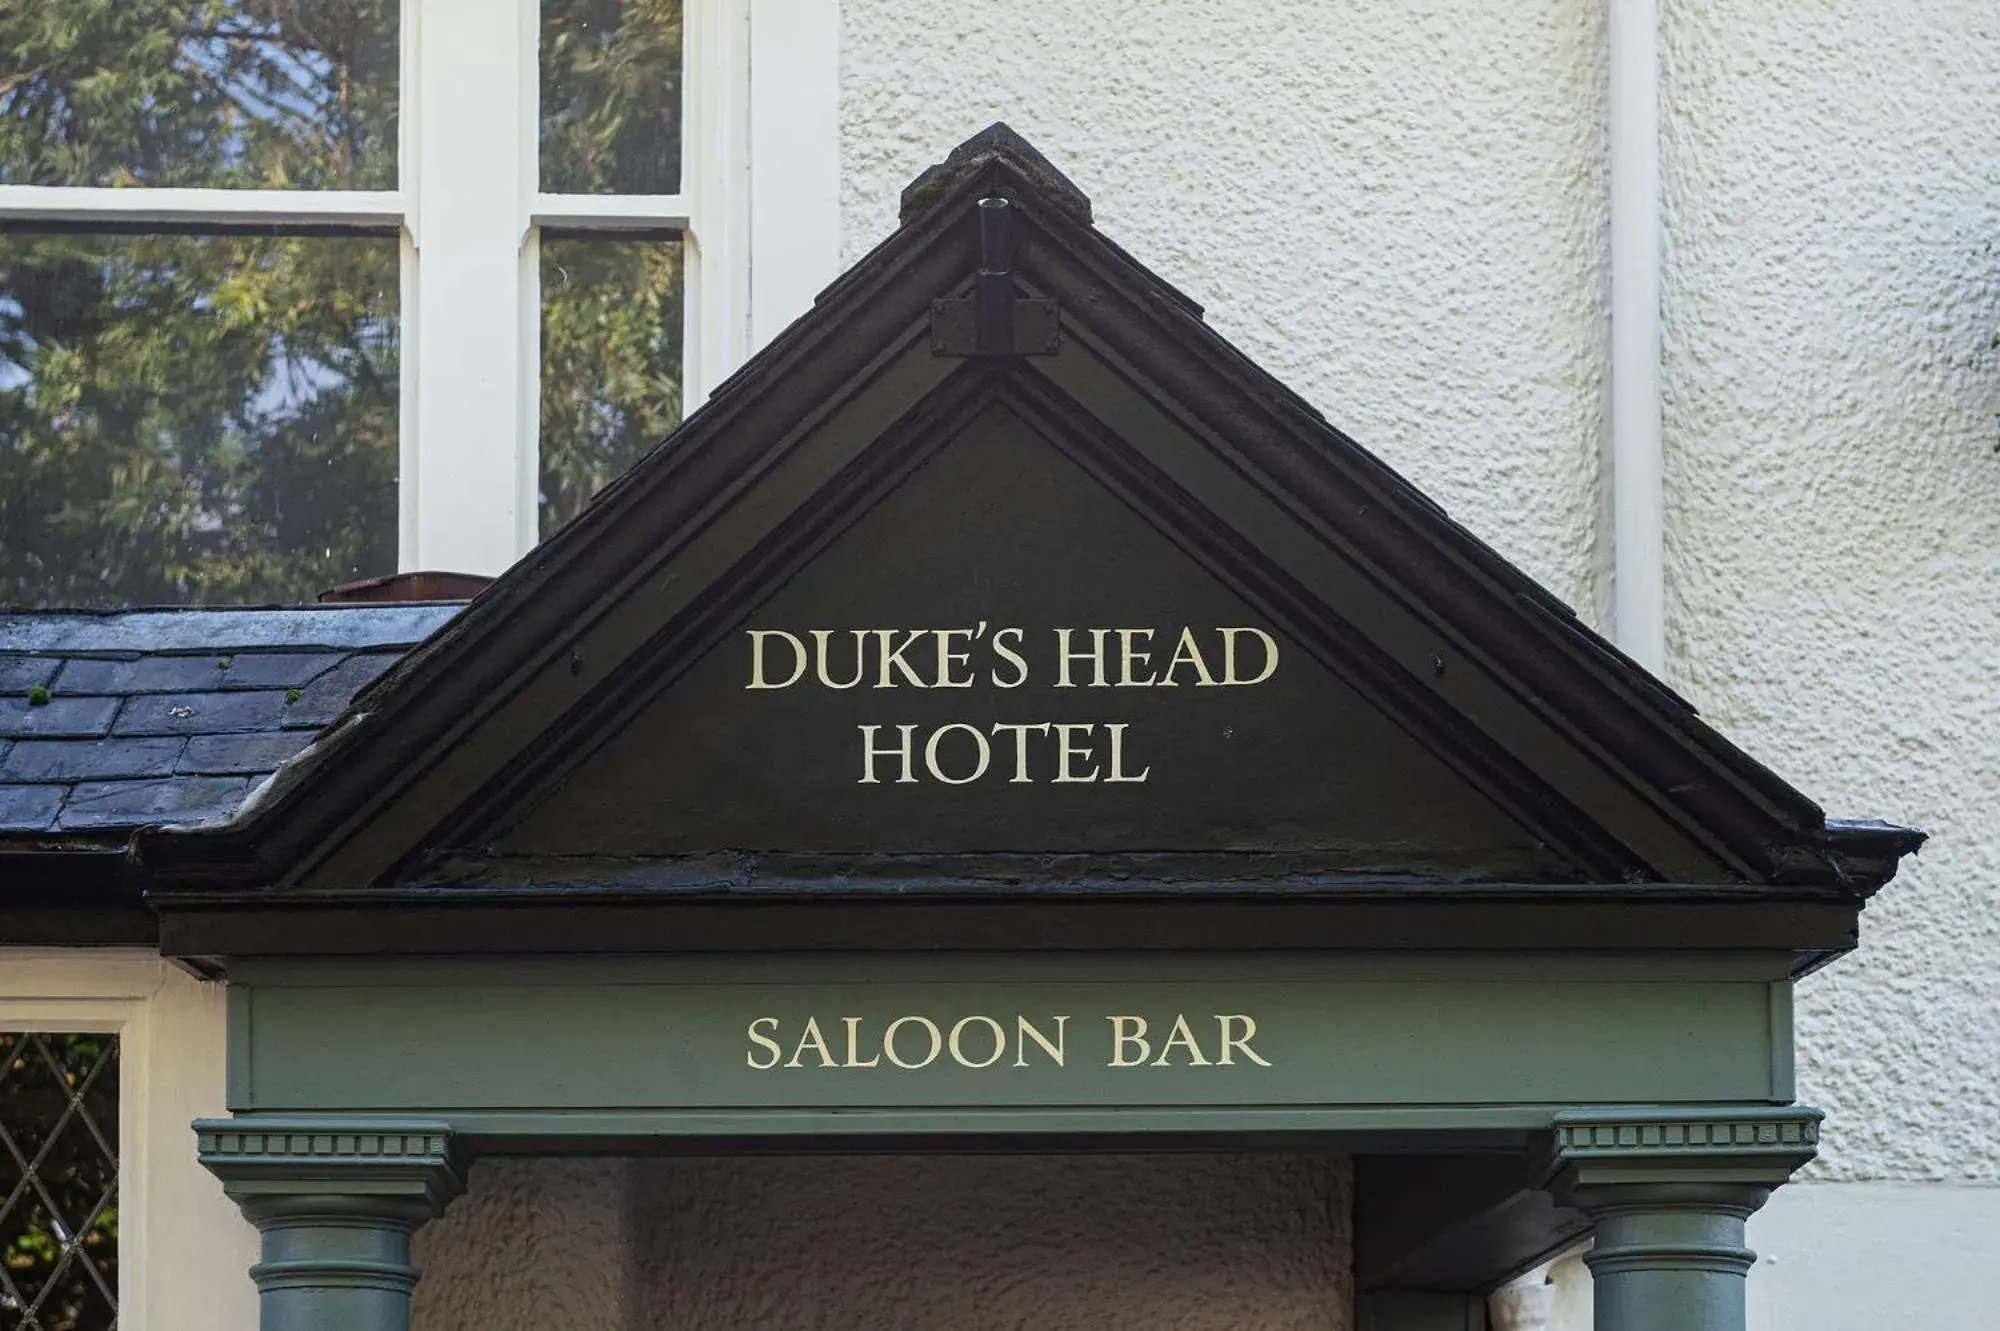 Property logo or sign in Dukes Head Hotel